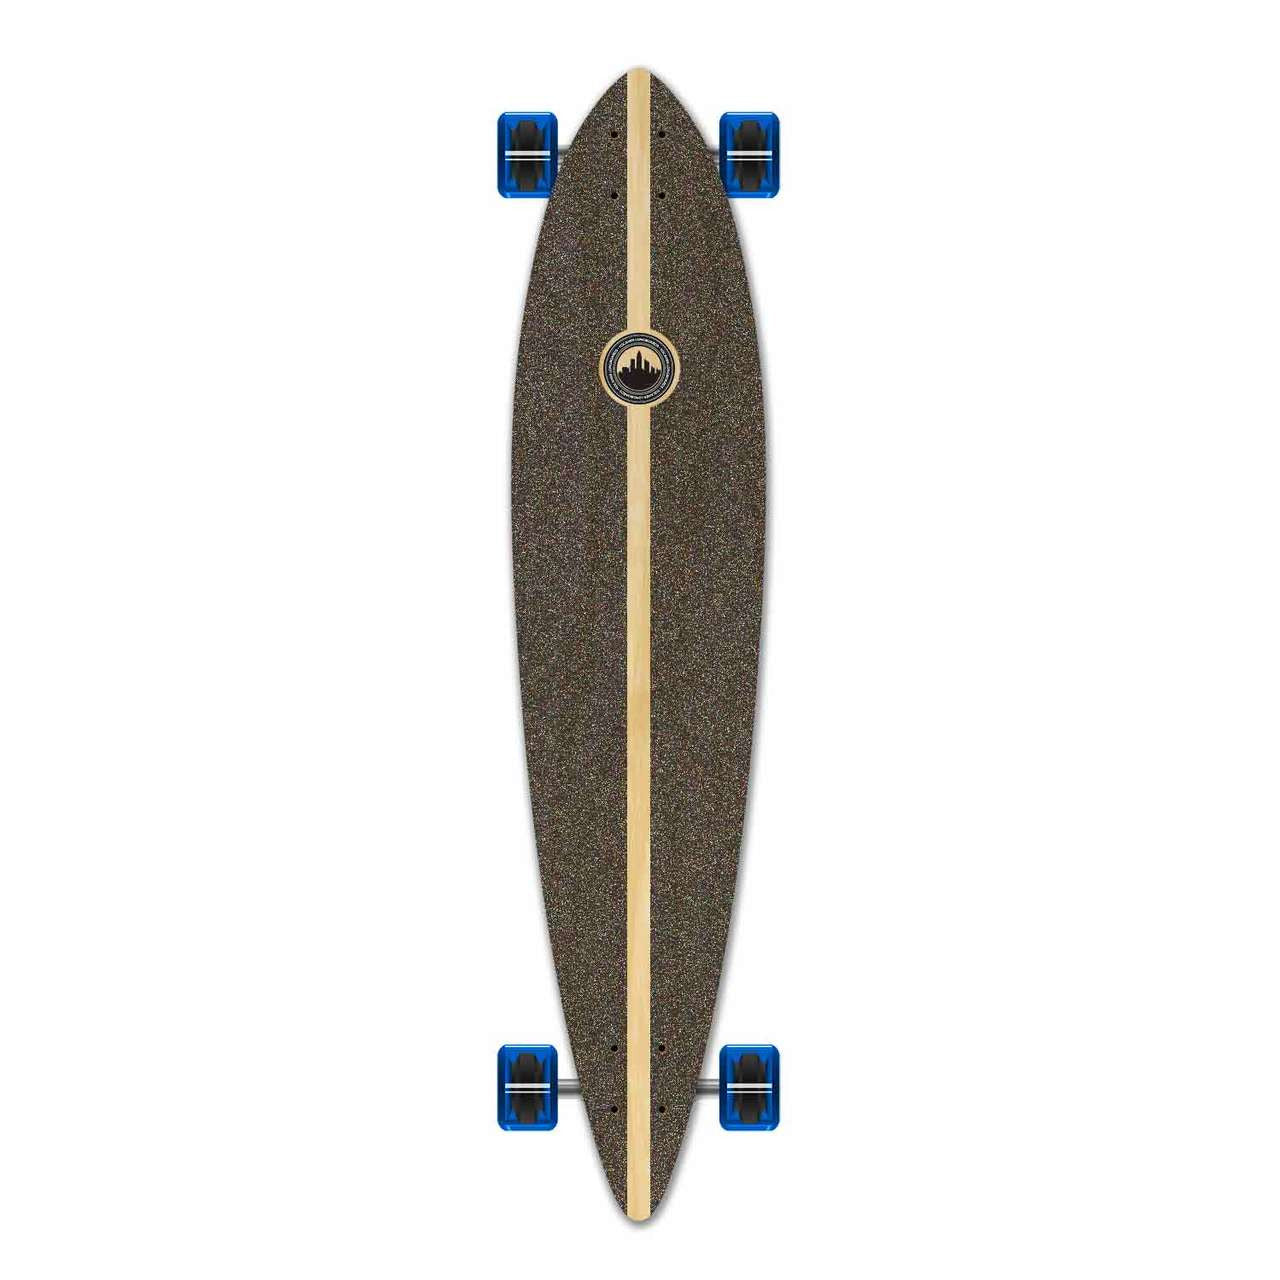 Yocaher Pintail Longboard Complete - Robot